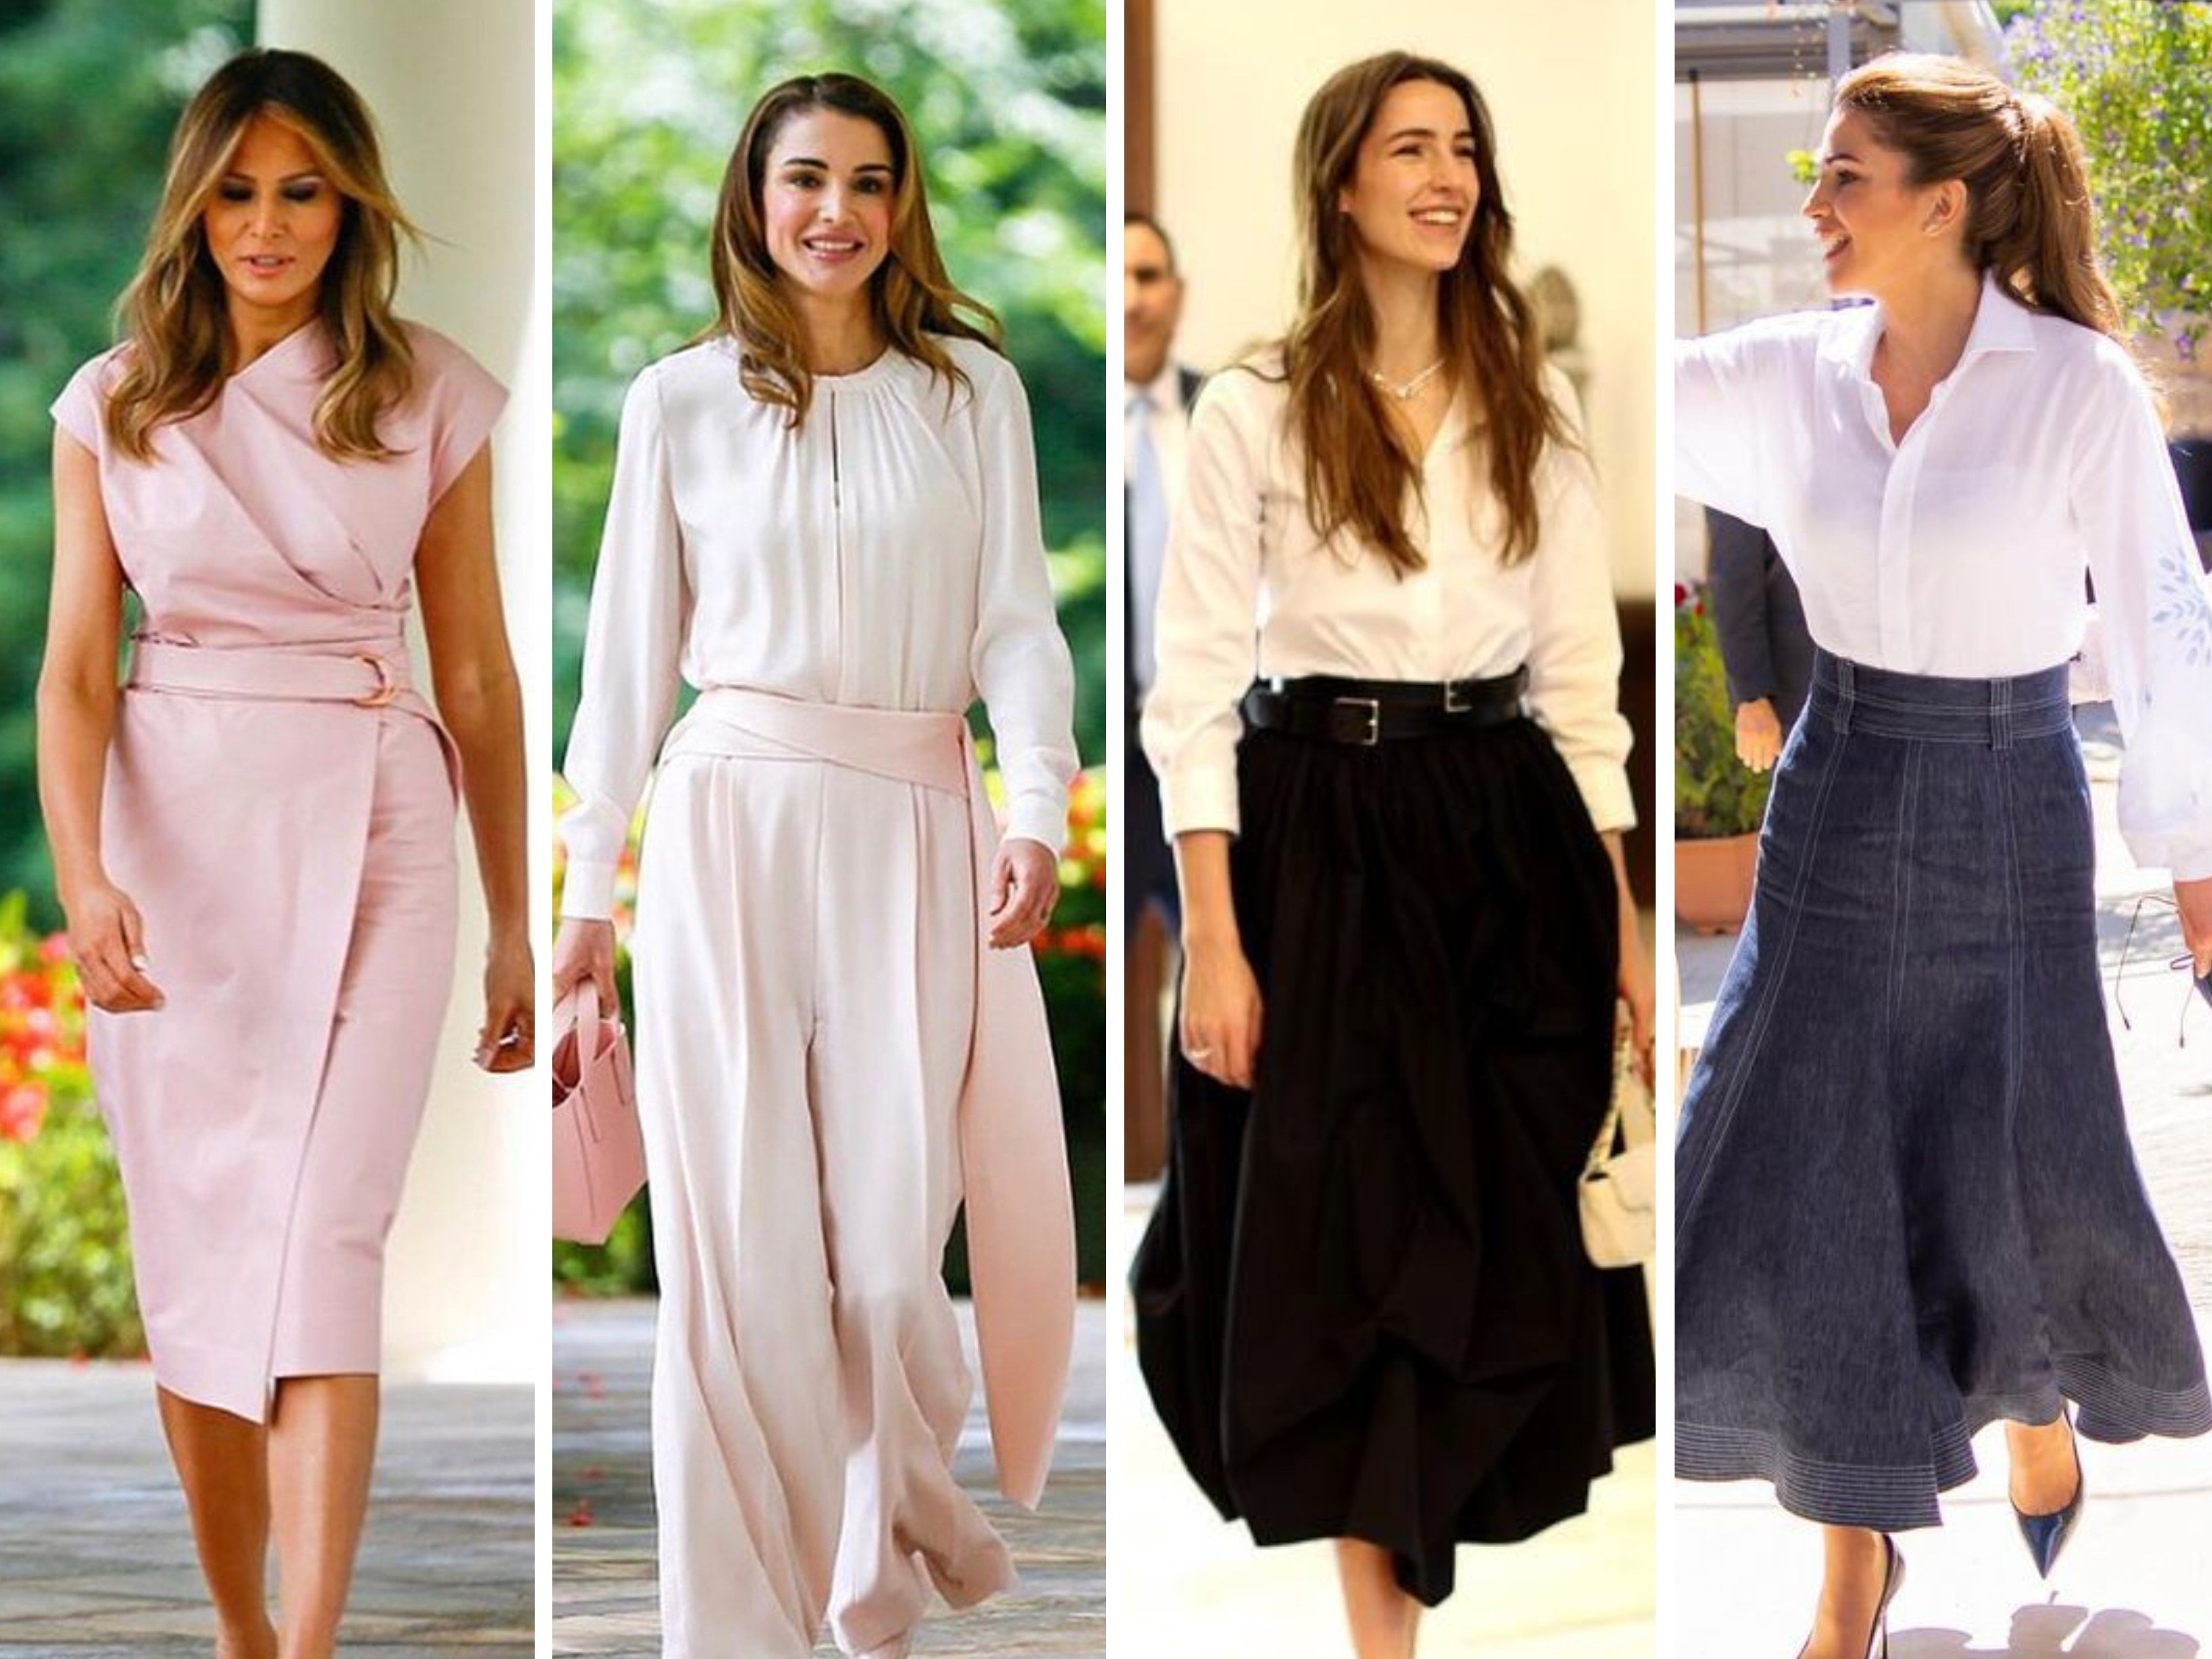 Queen Rania has twinned with many celebrities over the years, including Melania Trump as well as her own future daughter-in-law, Rajwa Al Saif. Photos: @queenrania, @alhusseinjo/Instagram